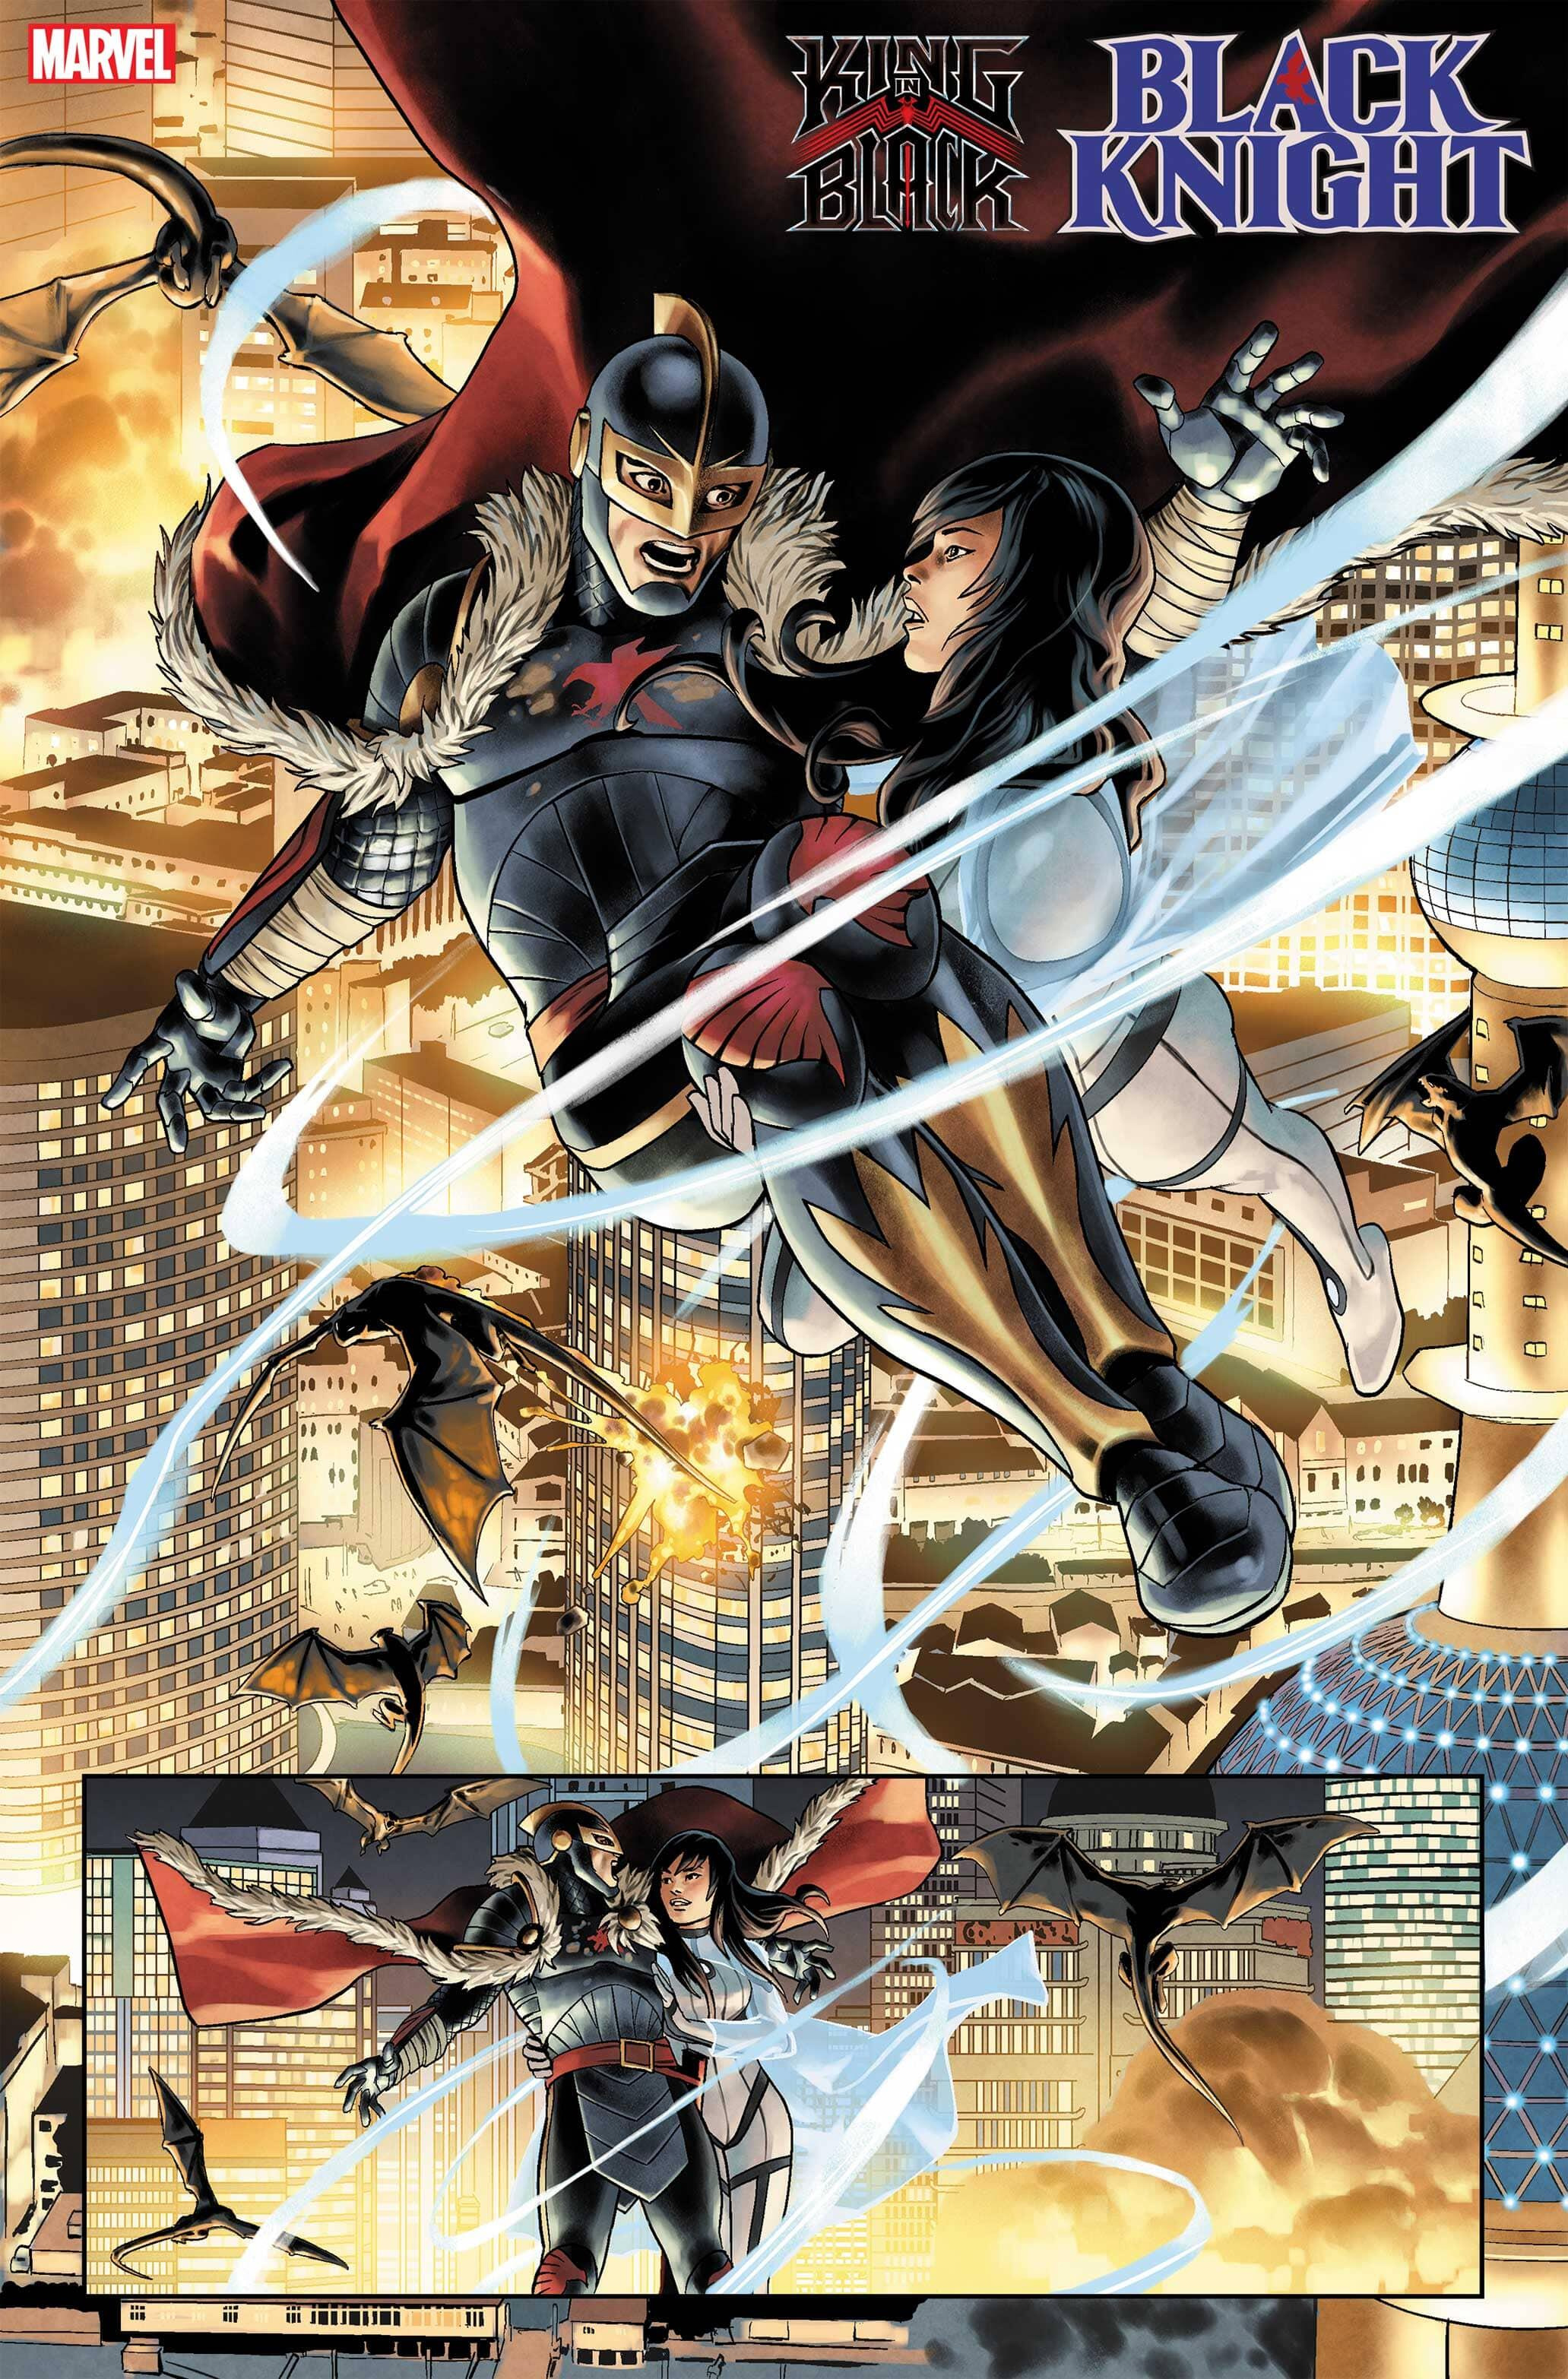 Marvel's Black Knight Takes up His Sword Against the King